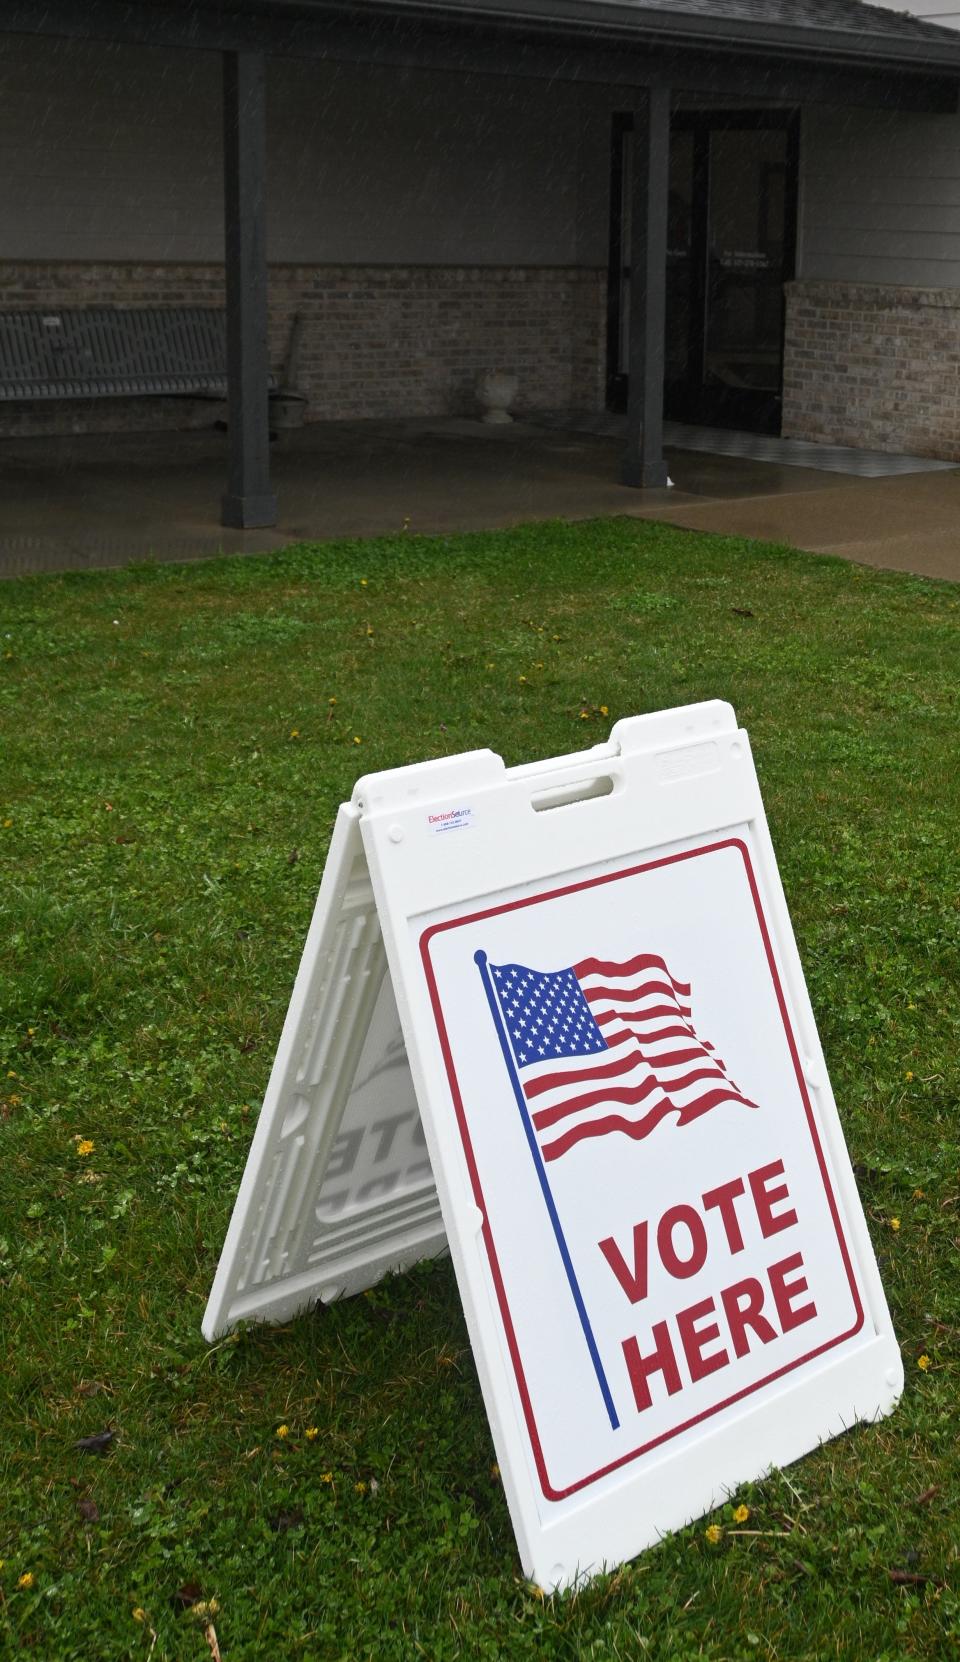 Voters will head to the polls Aug. 6.